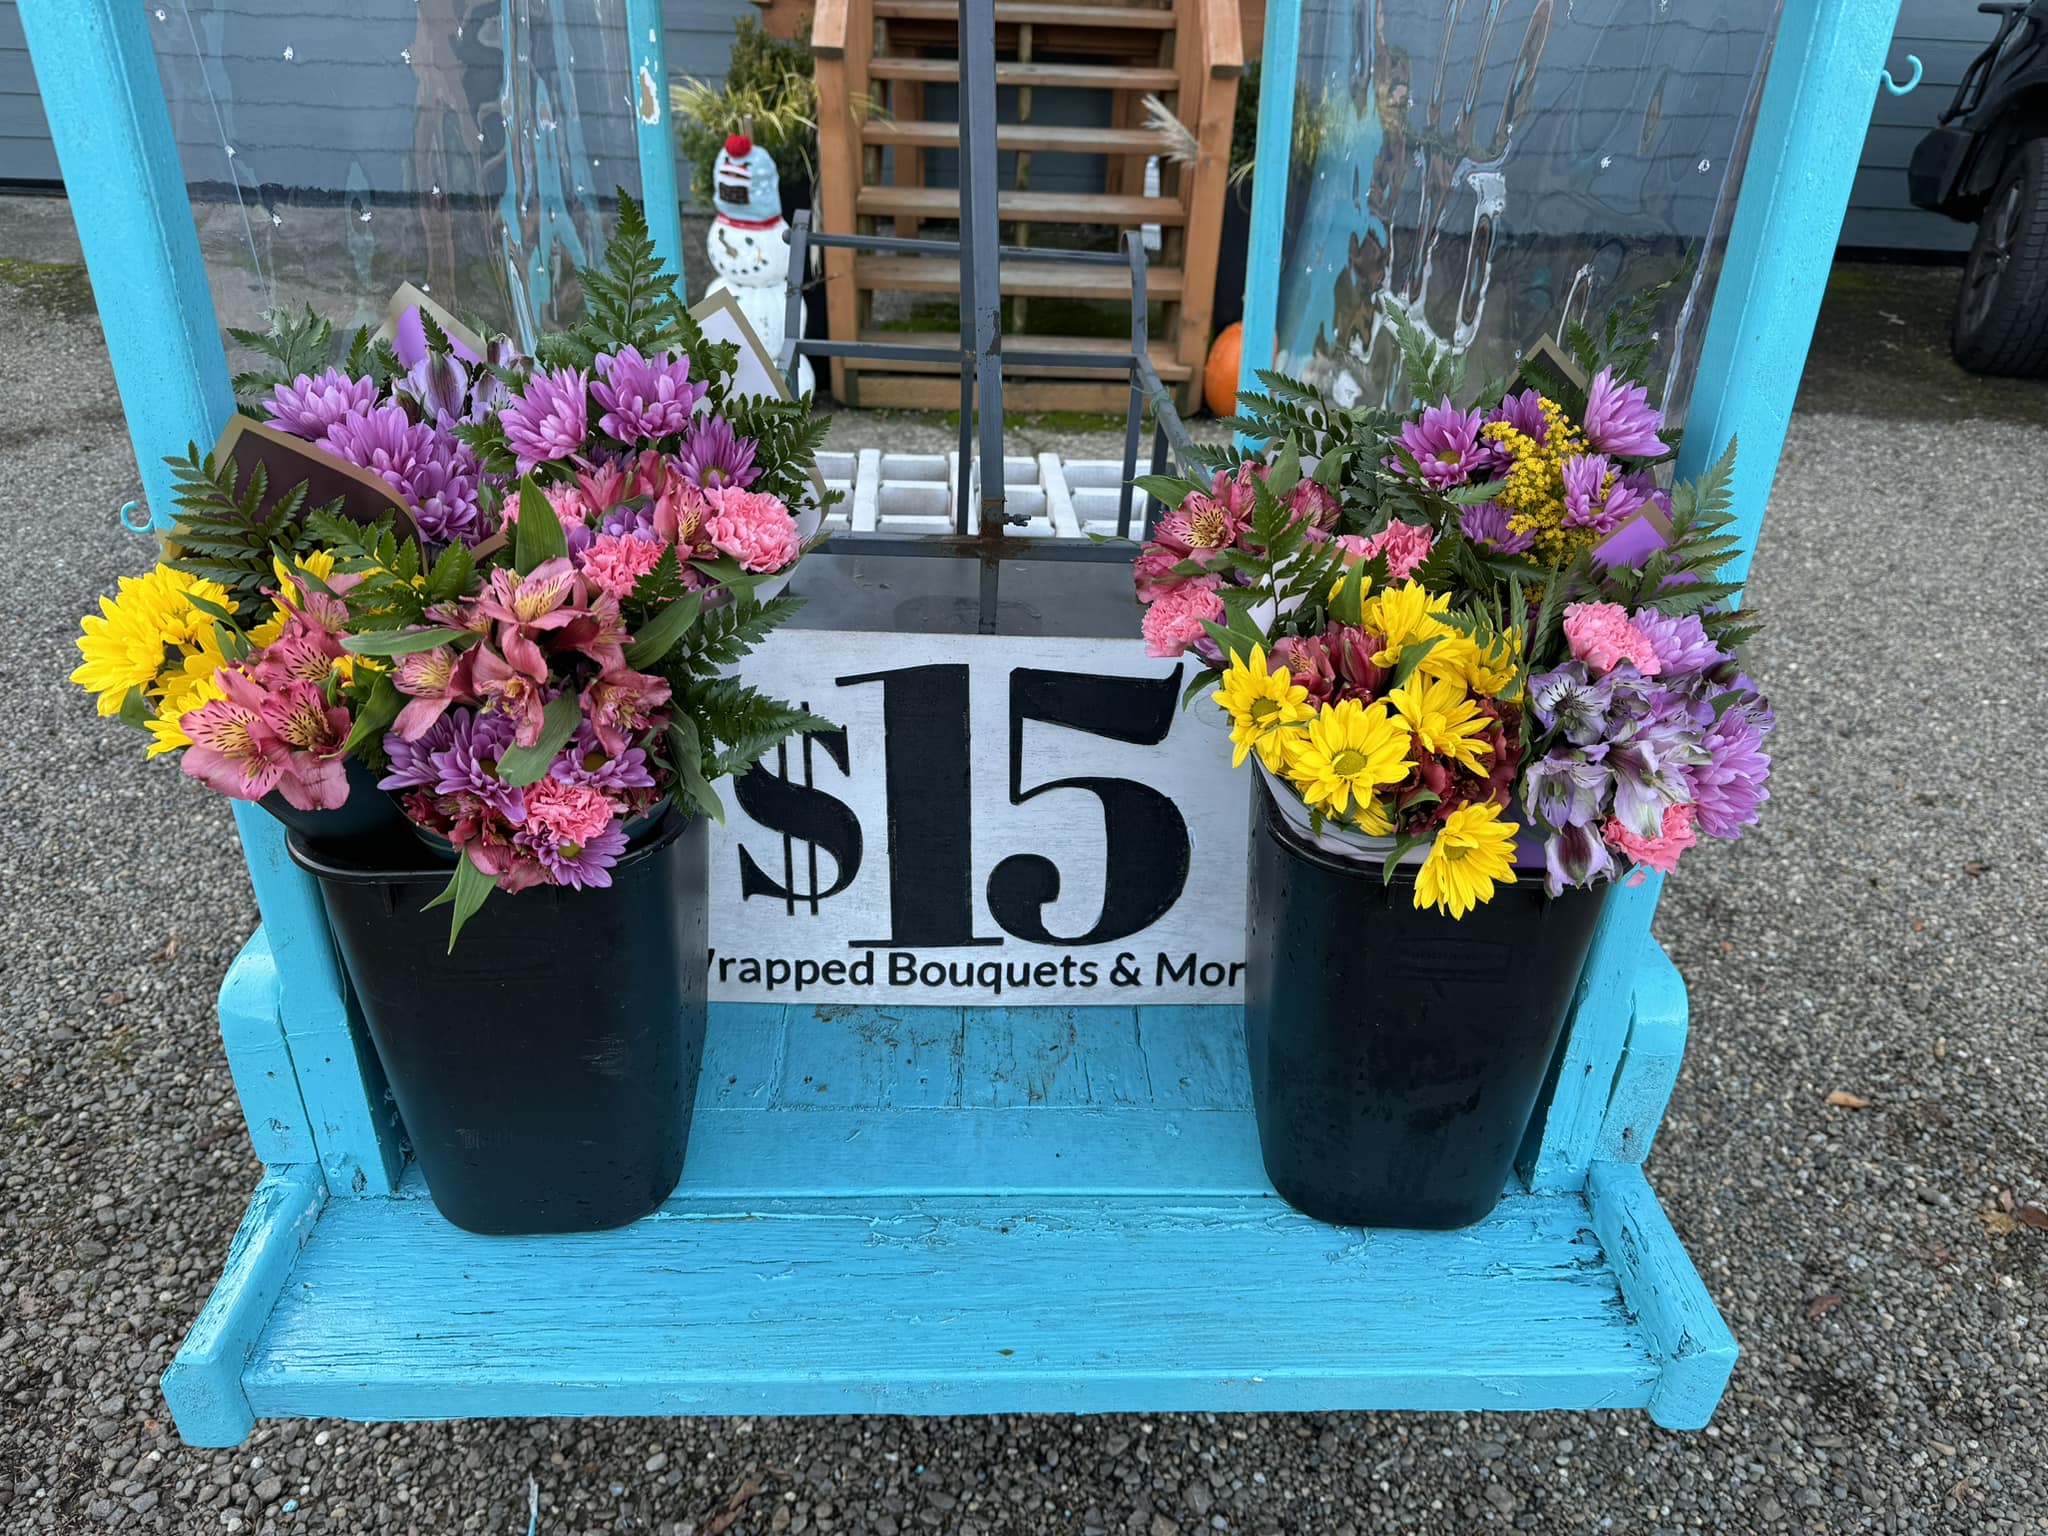 360 Shops- Floral, Gifts & More. 207 2nd Ave SW, Ilwaco Washington 98624